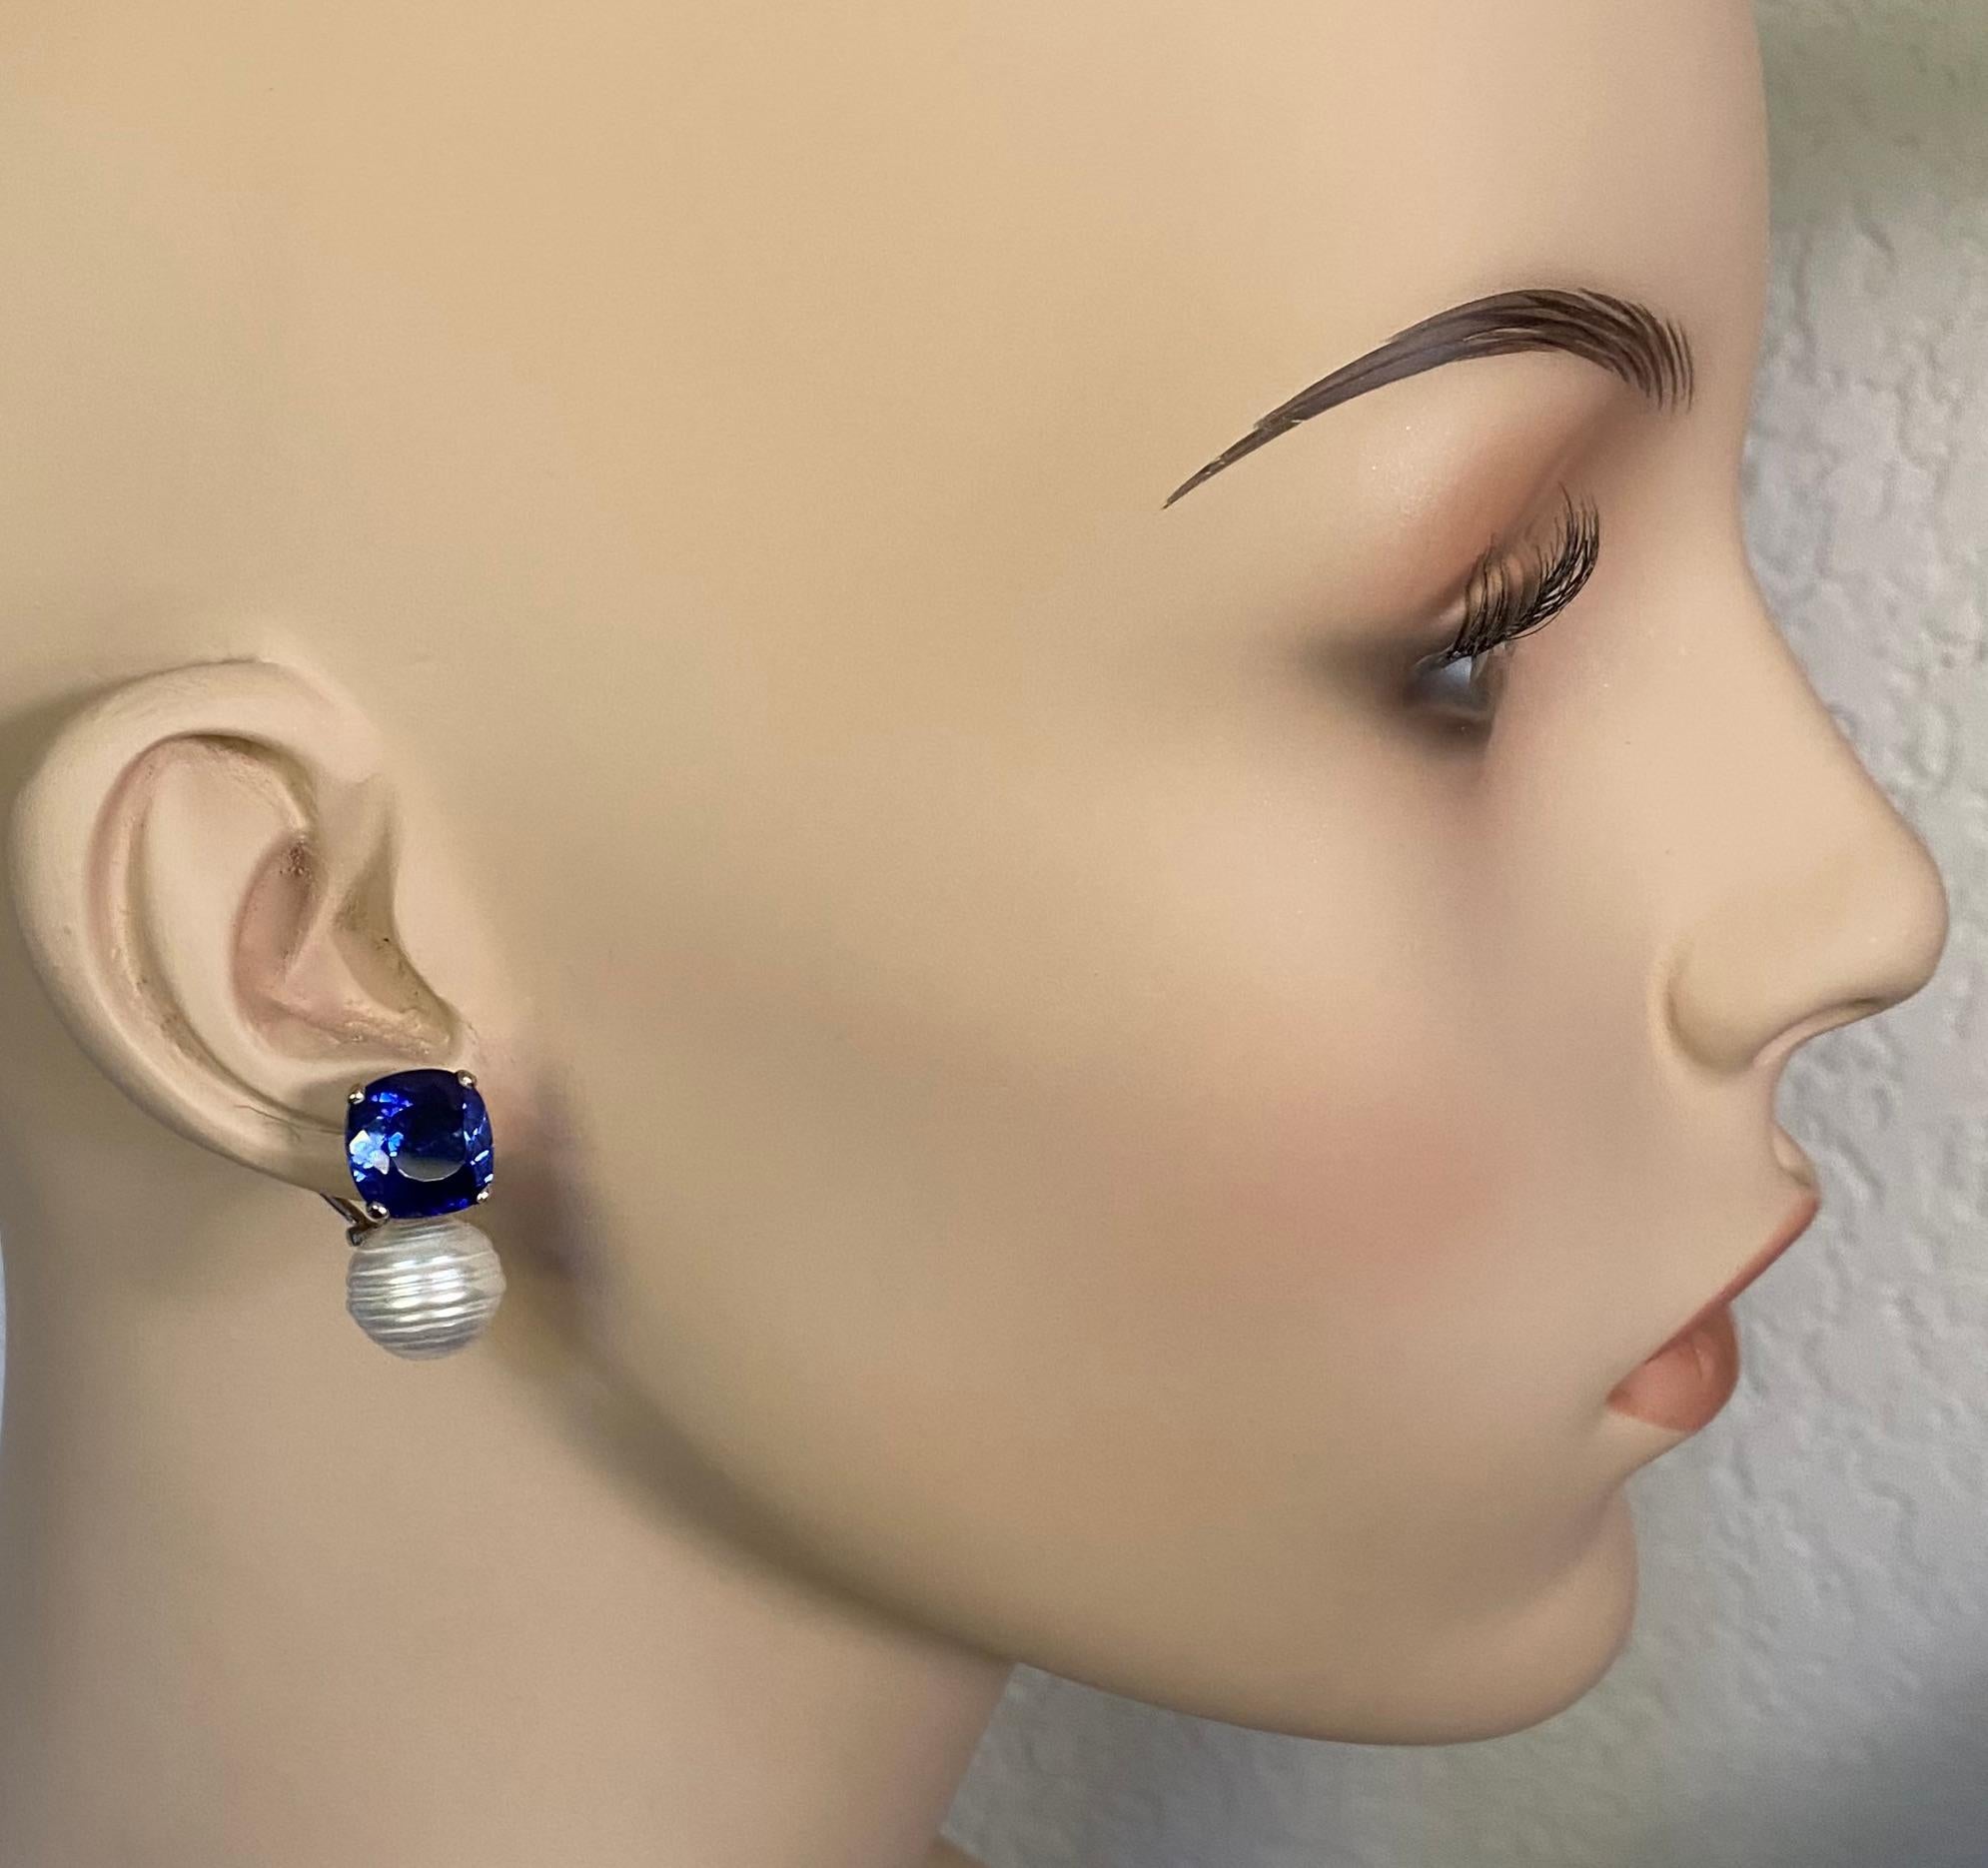 Blue sapphires are paired with Paspaley South Seas circle' pearls in these Due Gemme drop earrings.  The sapphires (origin: Thailand) are a rich, velvety blue, cushion shaped and are very well cut and polished.  The sapphires are complimented by 12